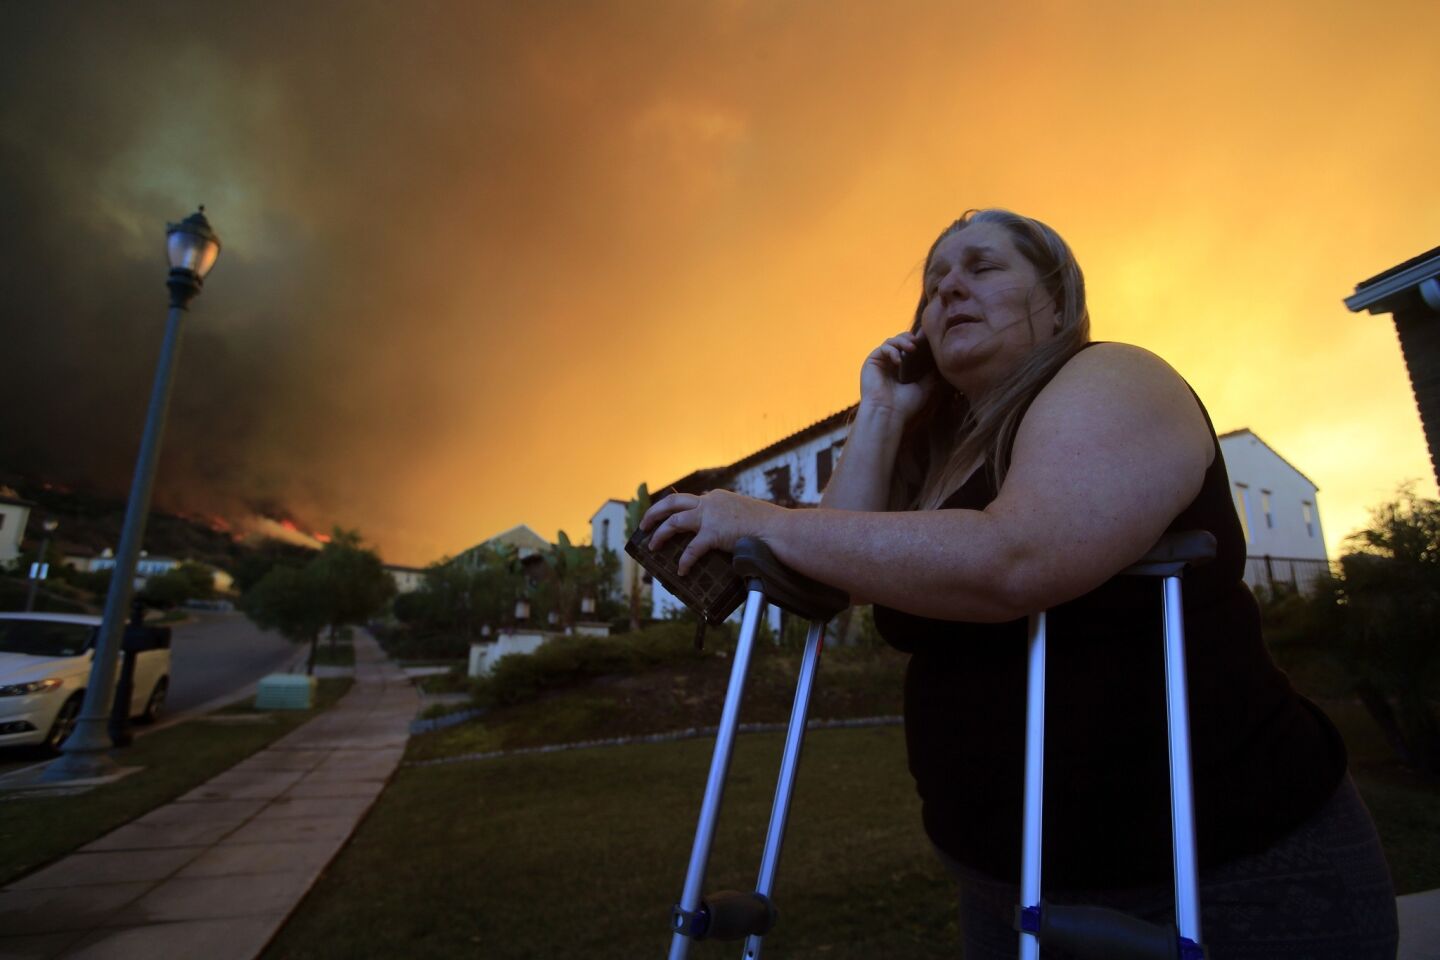 Glendora resident Cathy Doherty waits to be evacuated in the 500 block of Viewcrest Drive in Glendora as the Colby fire continues to burn.